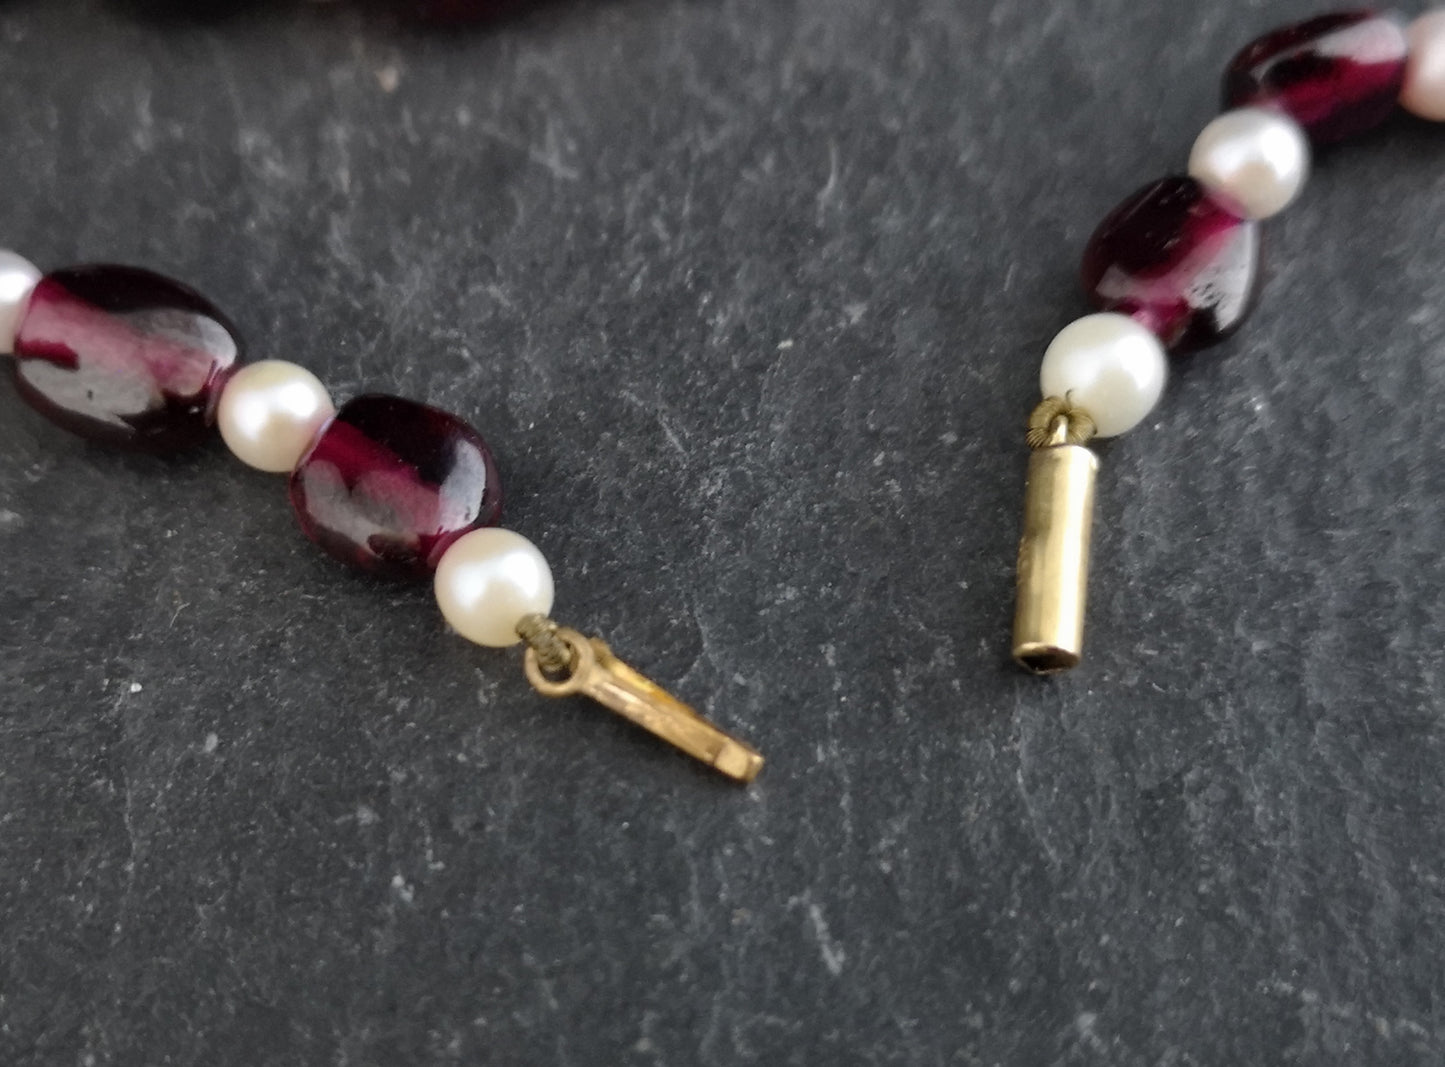 Vintage garnet and cultured pearl necklace, 9ct gold clasp